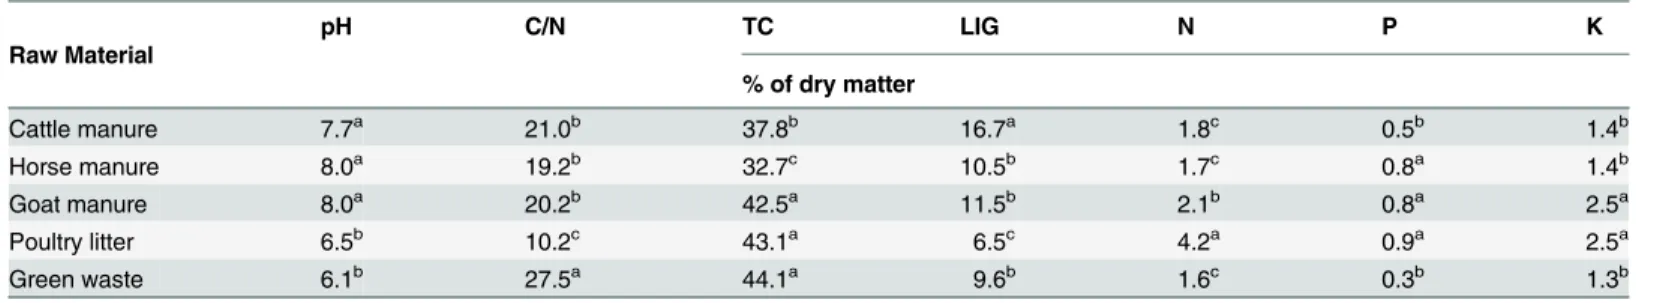 Table 1. Some characteristics of the raw materials used during the study.